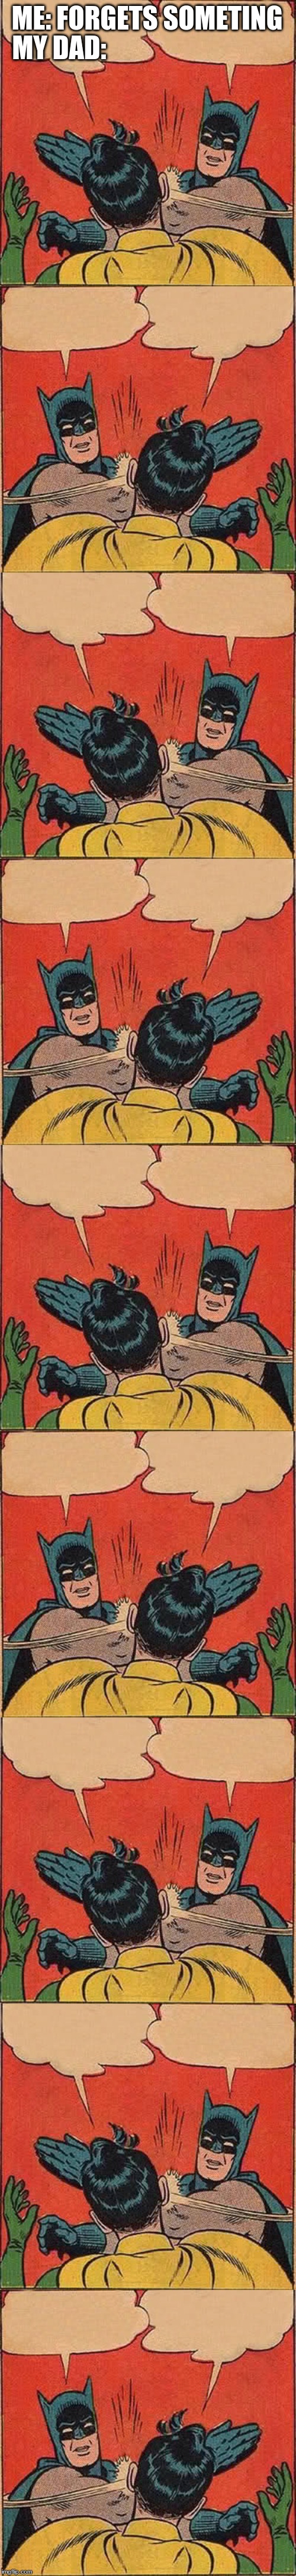 ME: FORGETS SOMETING; MY DAD: | image tagged in memes,batman slapping robin | made w/ Imgflip meme maker